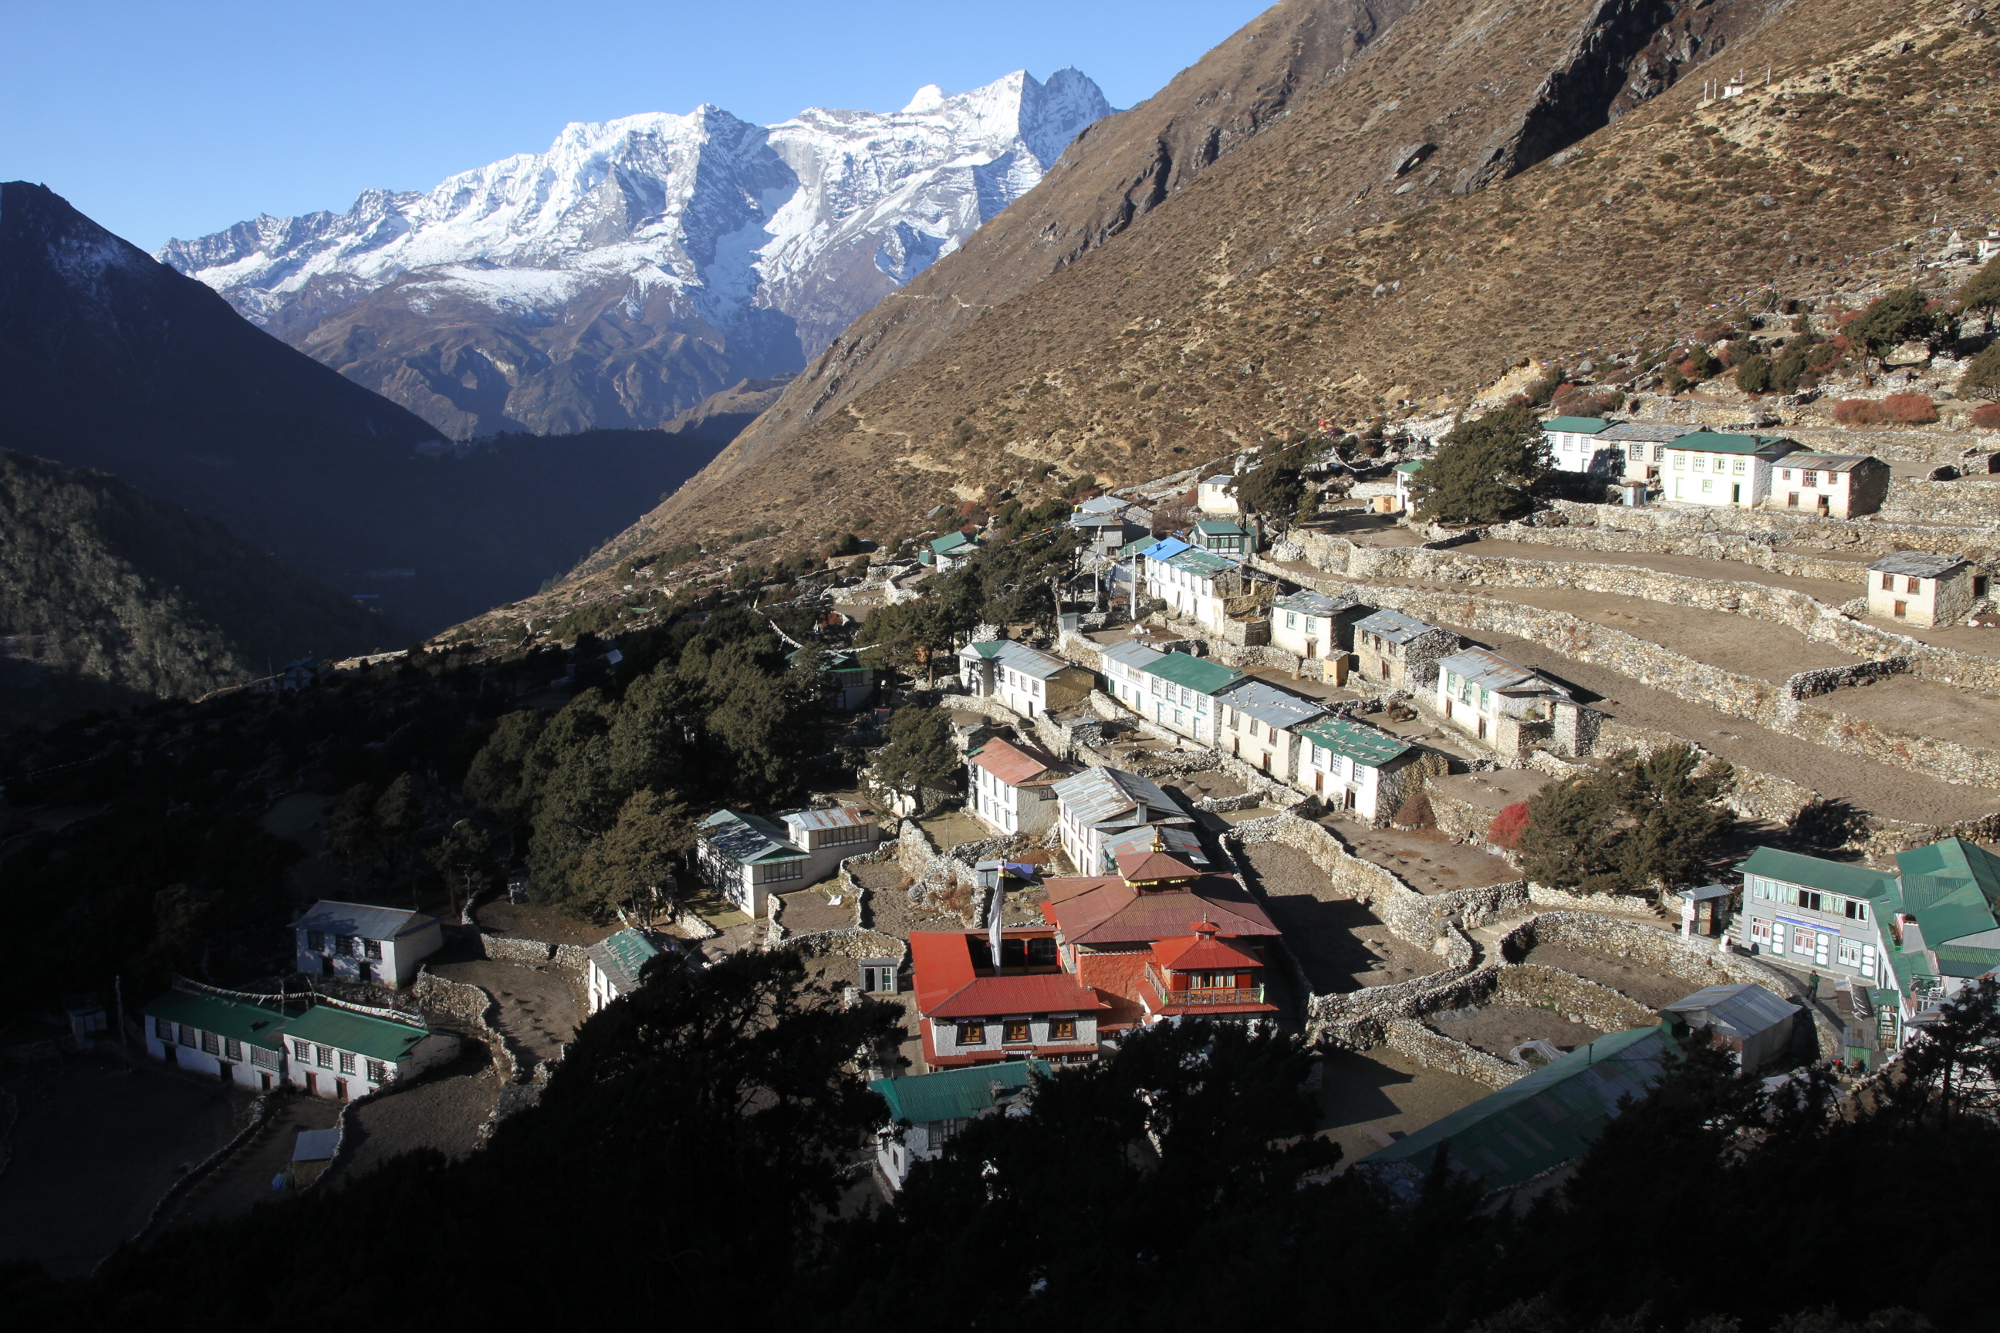 Upper Pangboche village with its famous gompa. Image by Bradley Mayhew / Lonely Planet